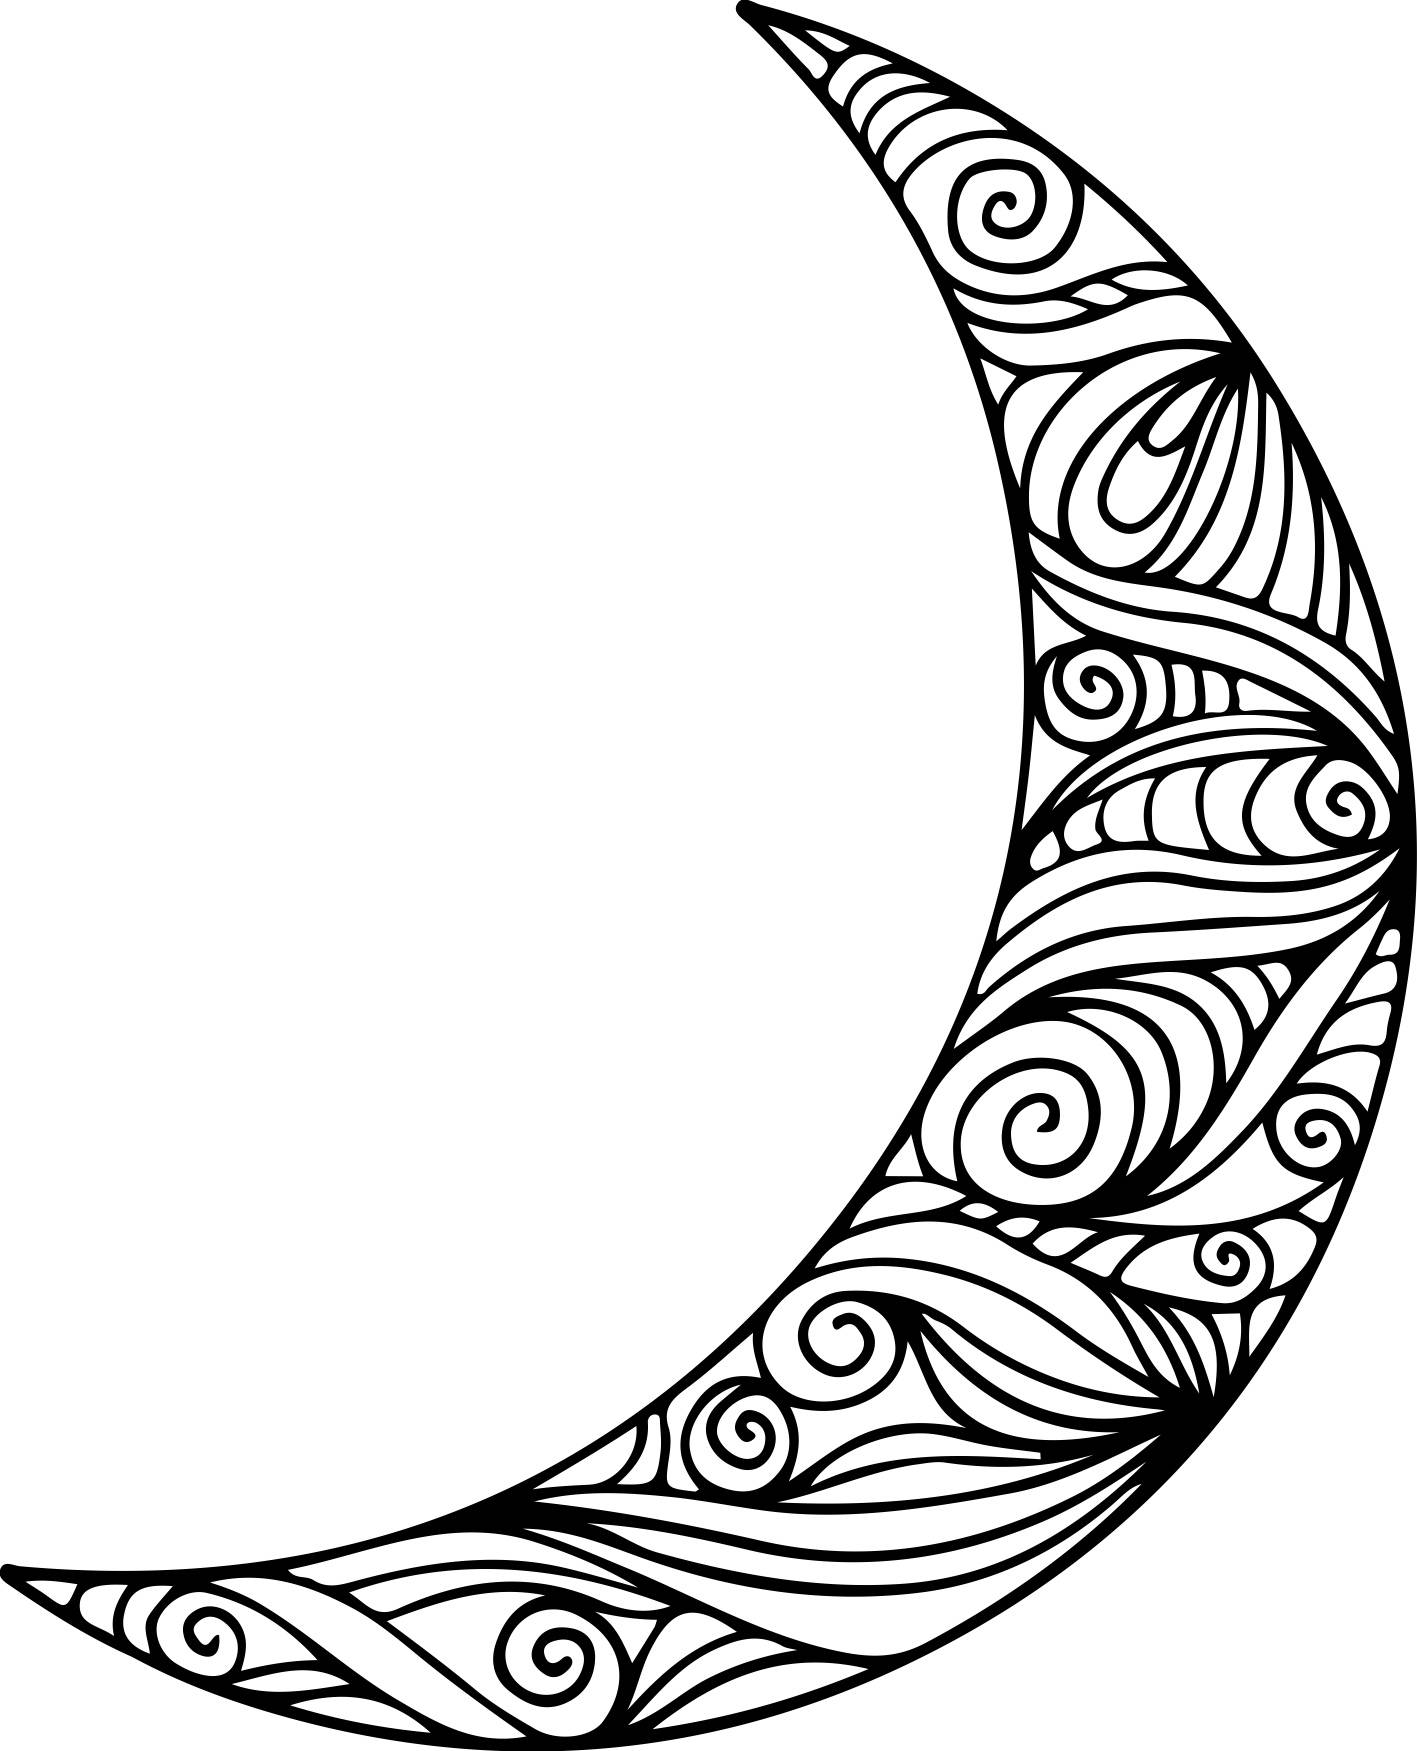 Hand drawn Half Moon decal / sticker - Wall decals for magical minds ...